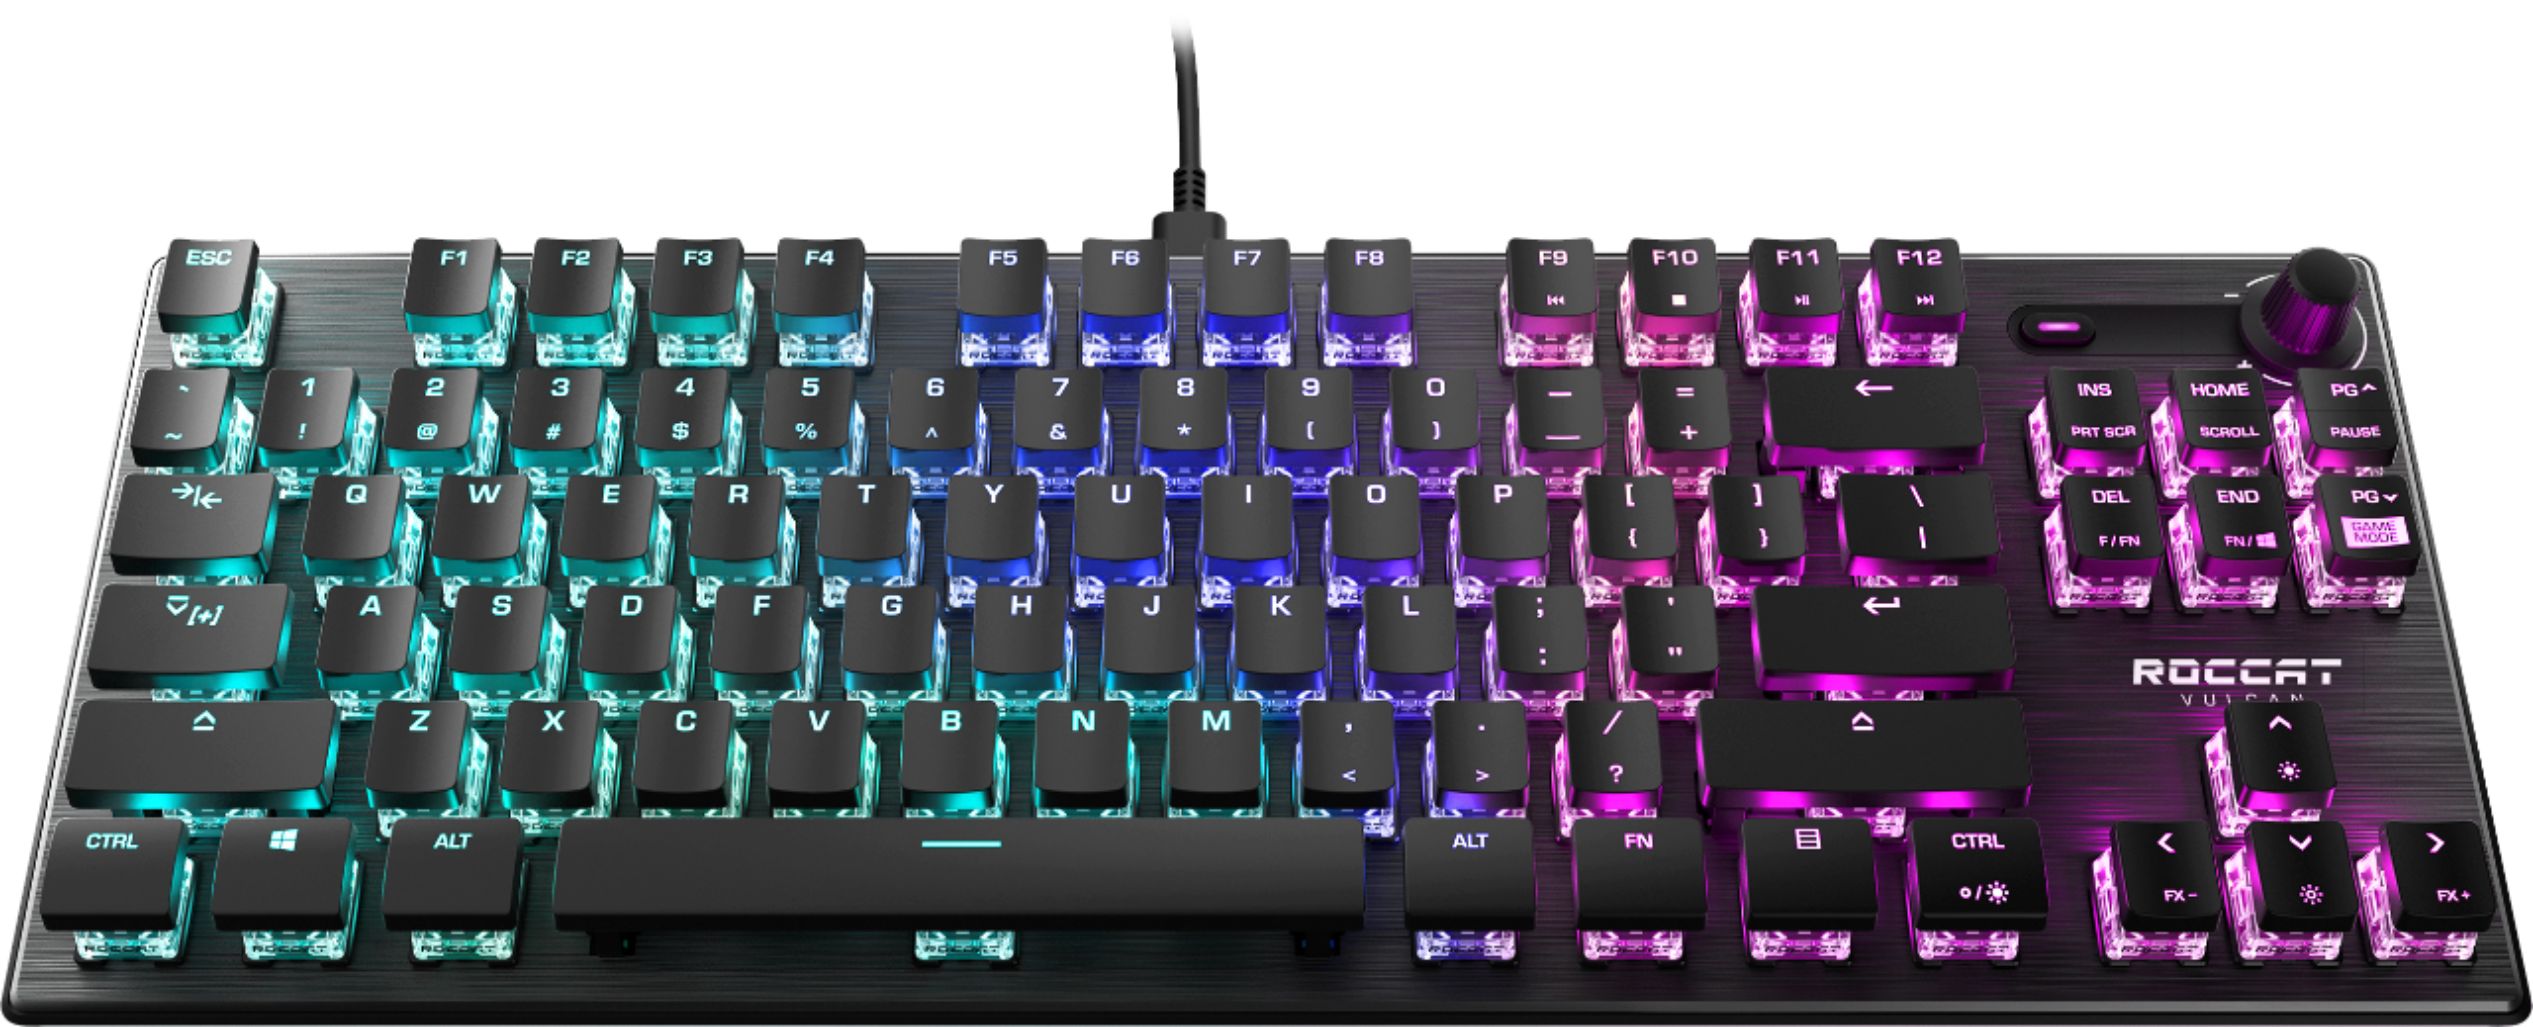 Lighting, Best Top Aluminum ROCCAT Anodized Compact and Switch - Mechanical Vulcan Buy TKL Titan Black ROC-12-272 Gaming Linear, with RGB Plate Keyboard